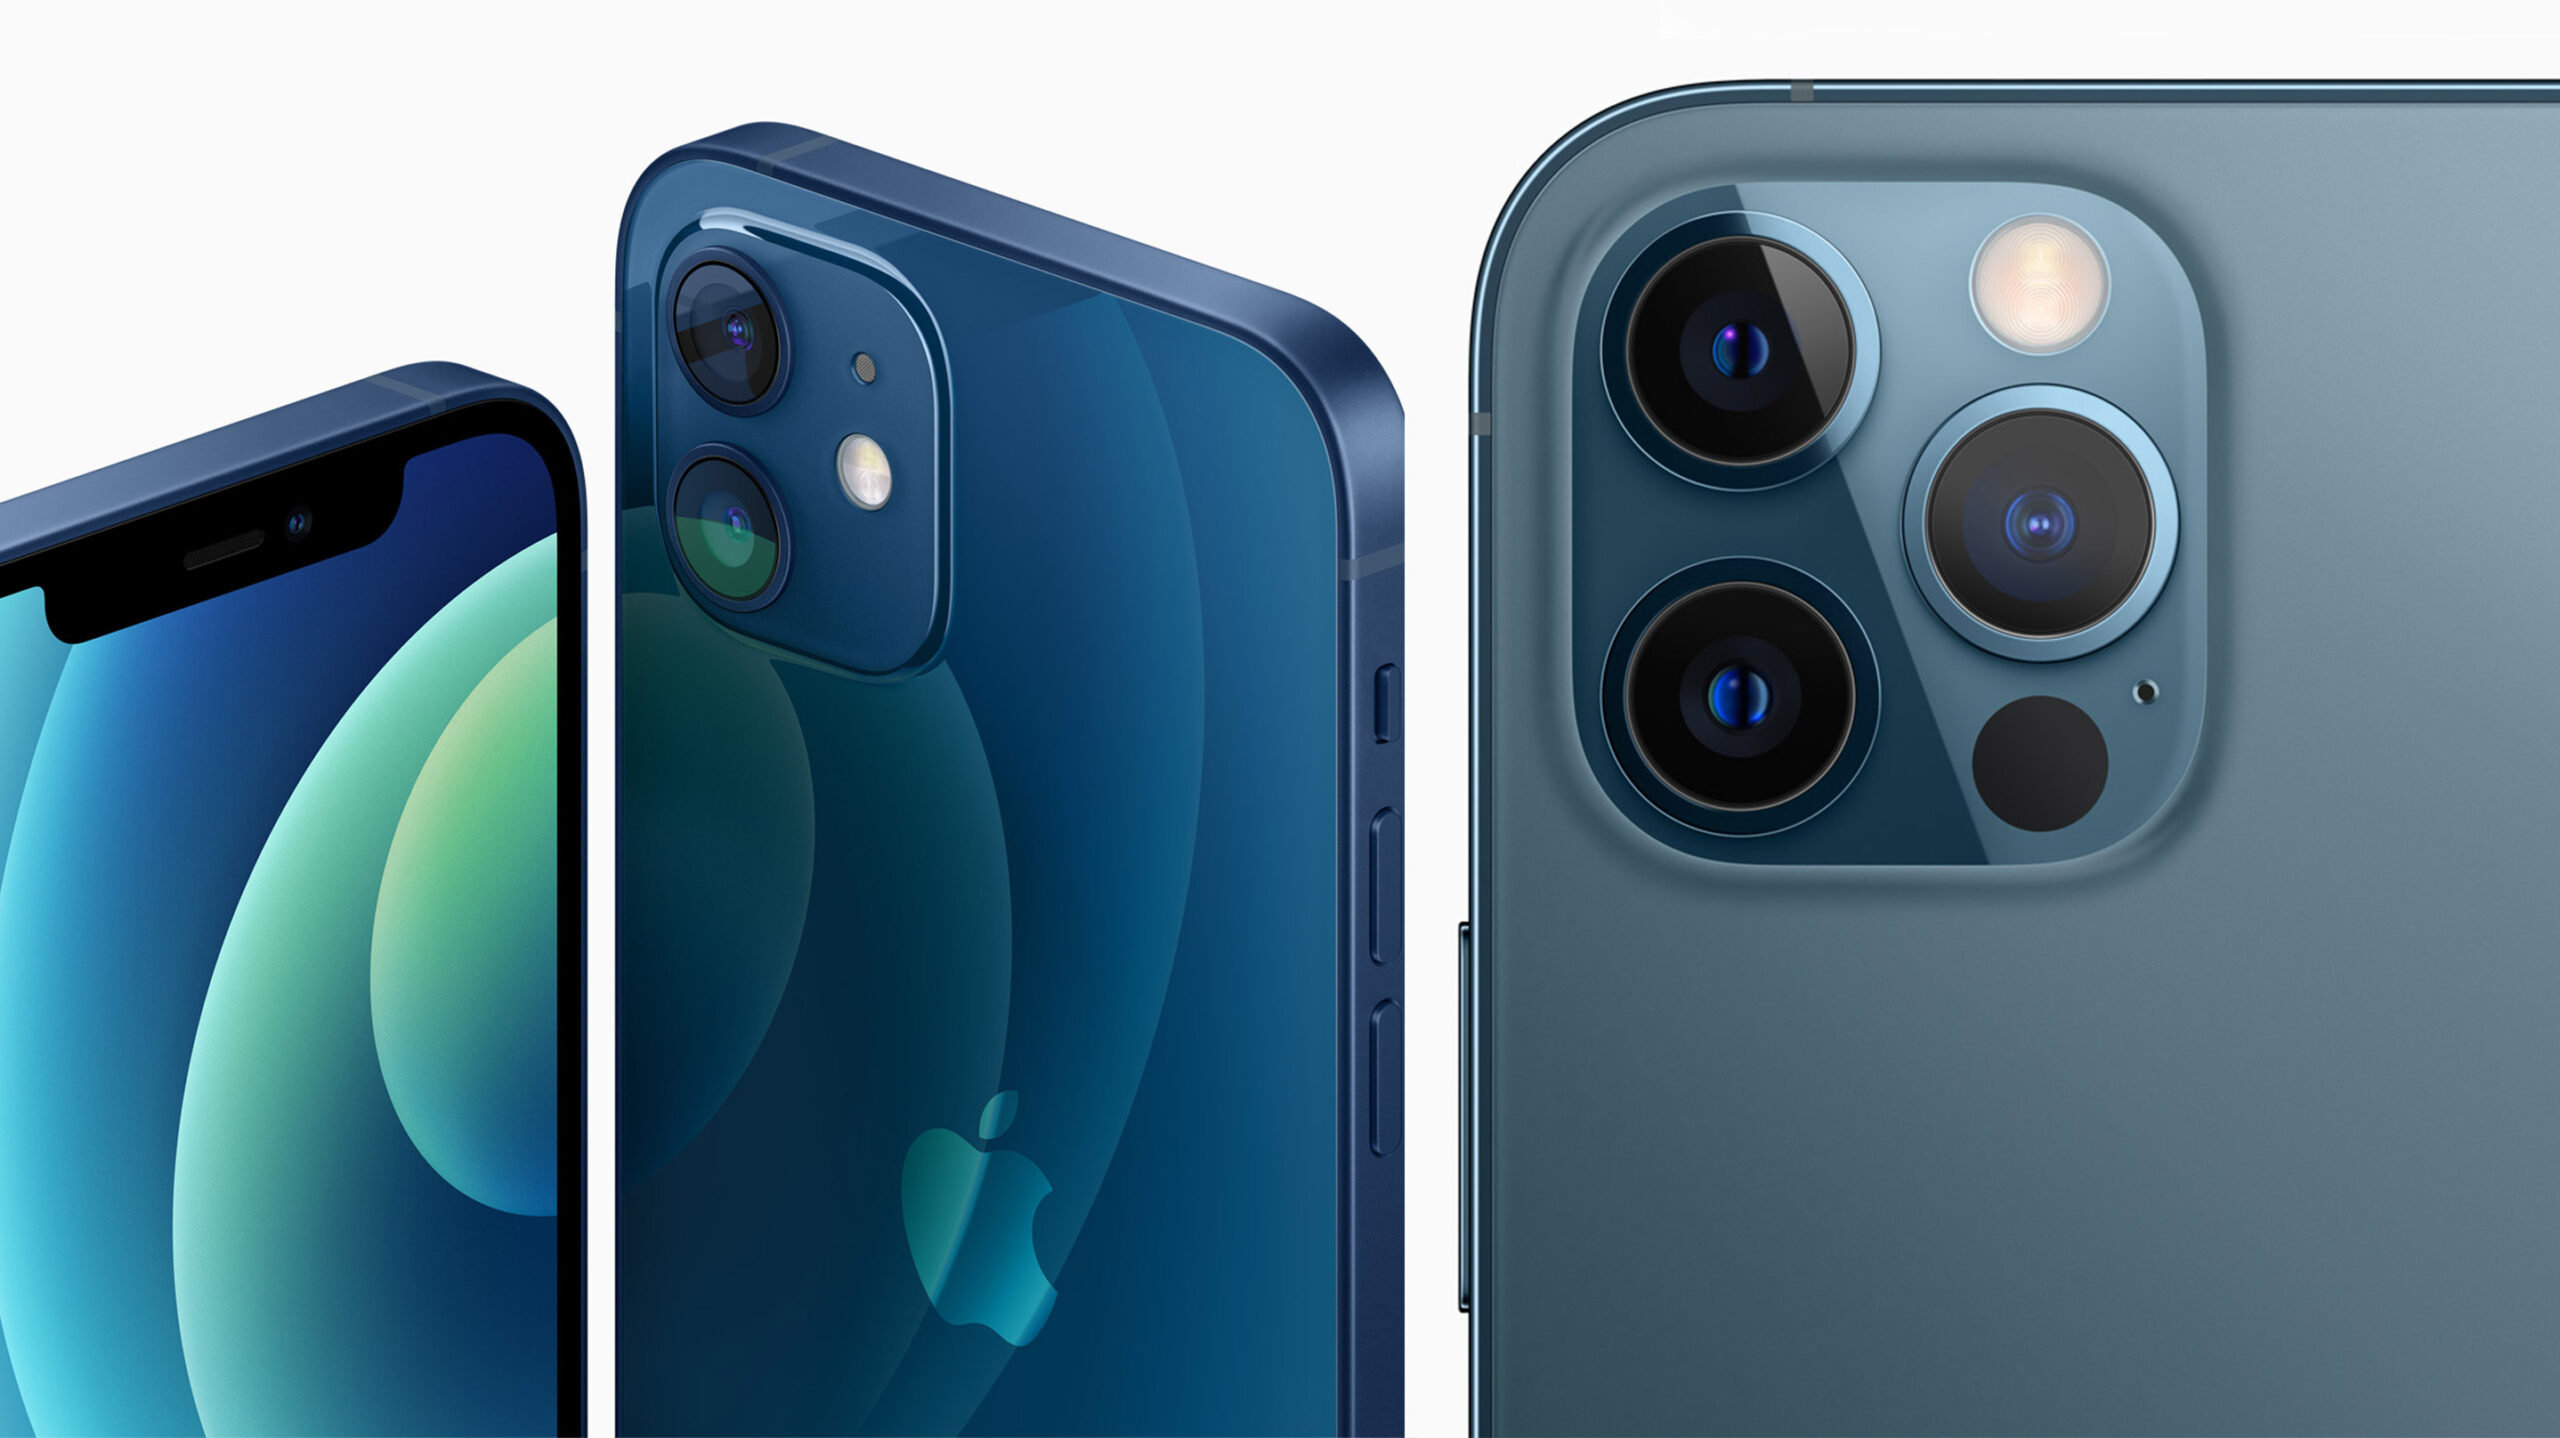 iPhone 12 and iPhone 12 Pro render